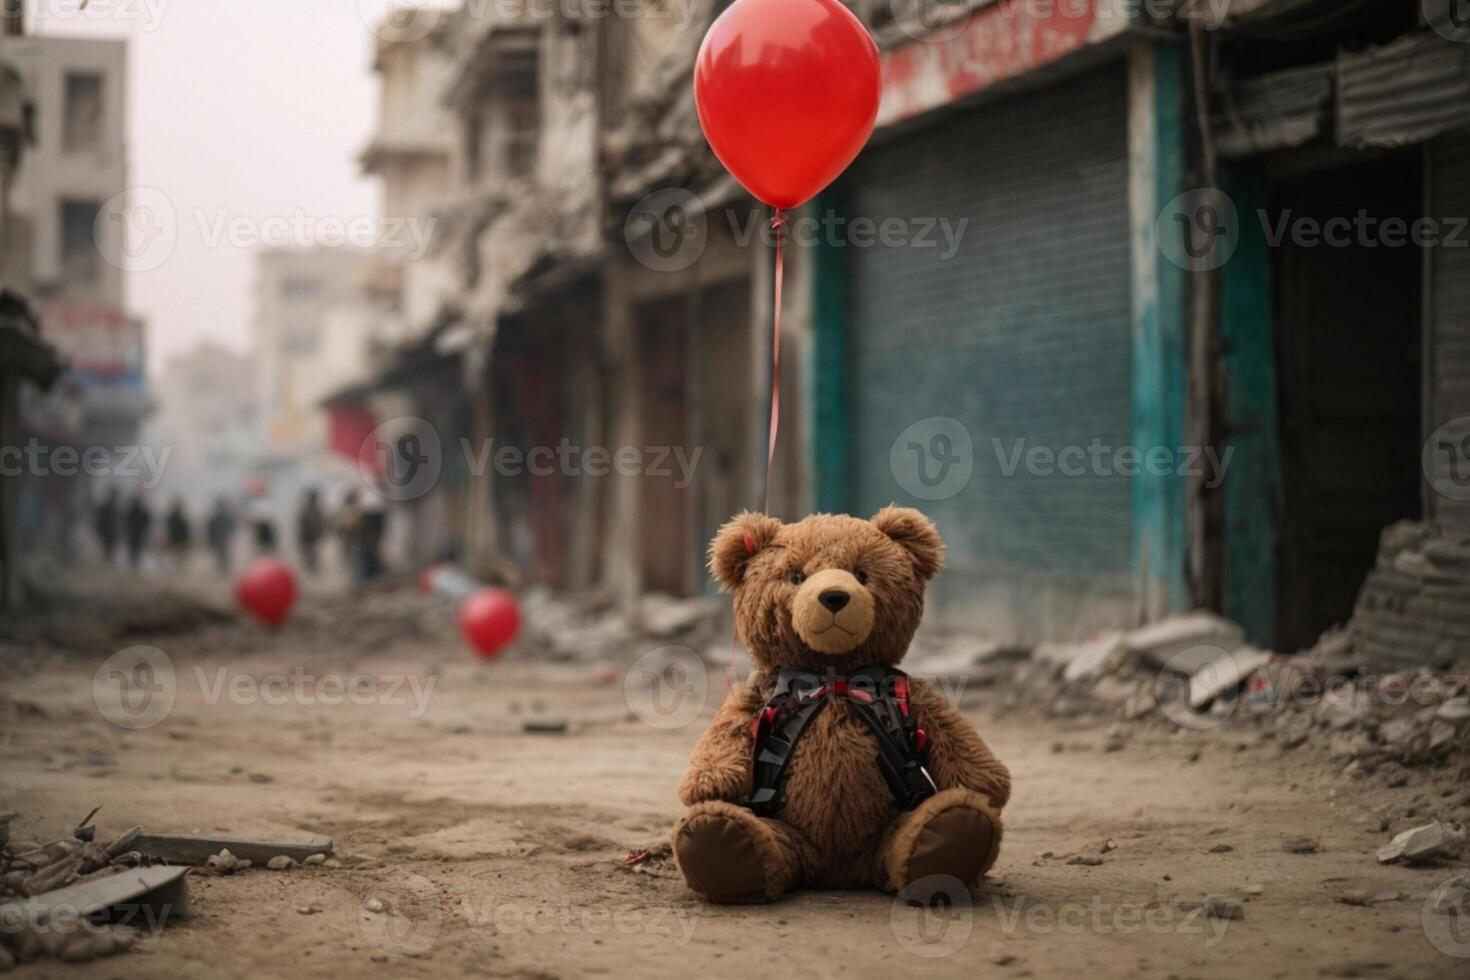 a teddy bear with a red balloon sits in a destroyed city photo